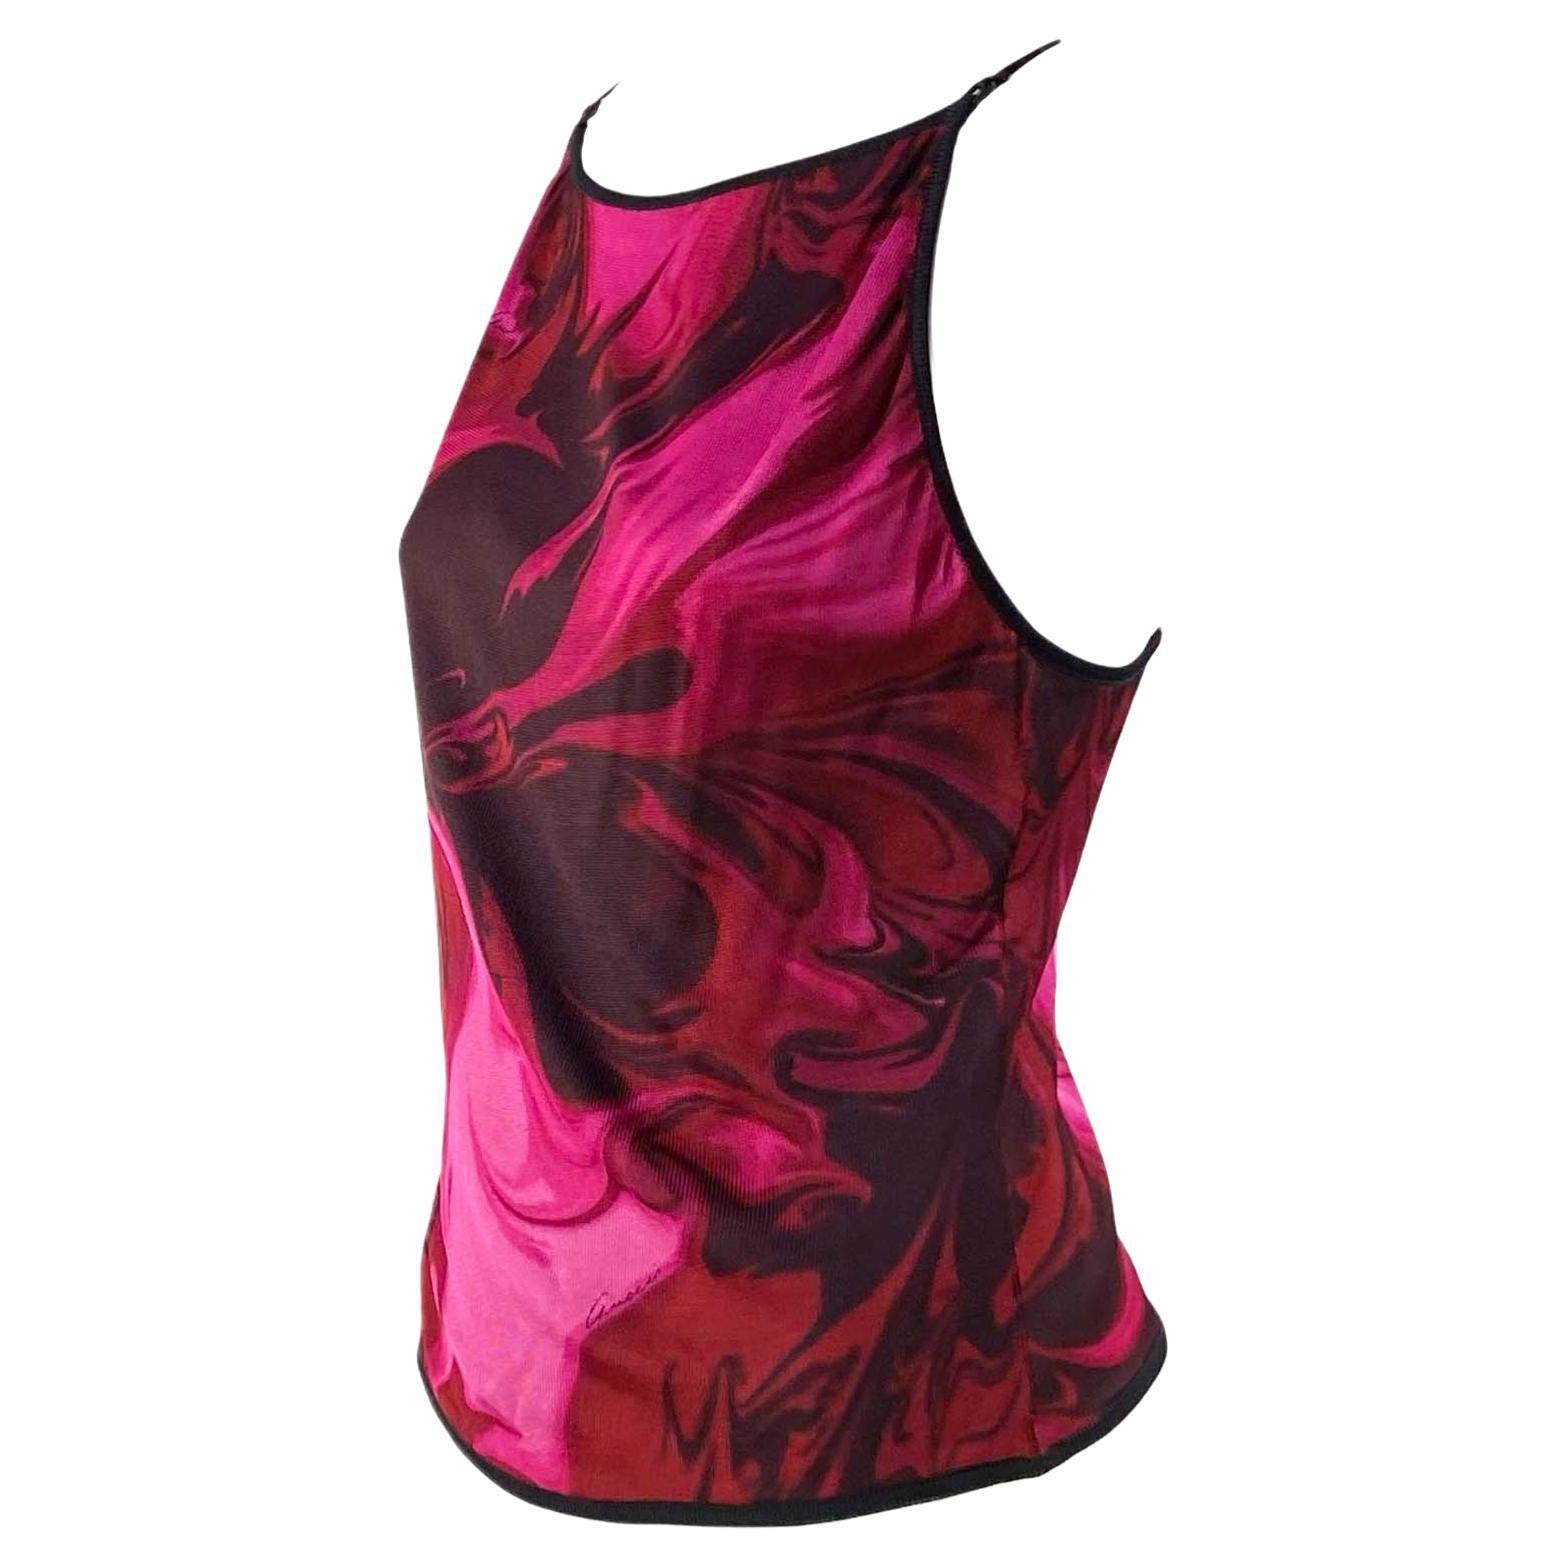 S/S 2001 Gucci by Tom Ford Pink Magma Print Backless Tank Top For Sale